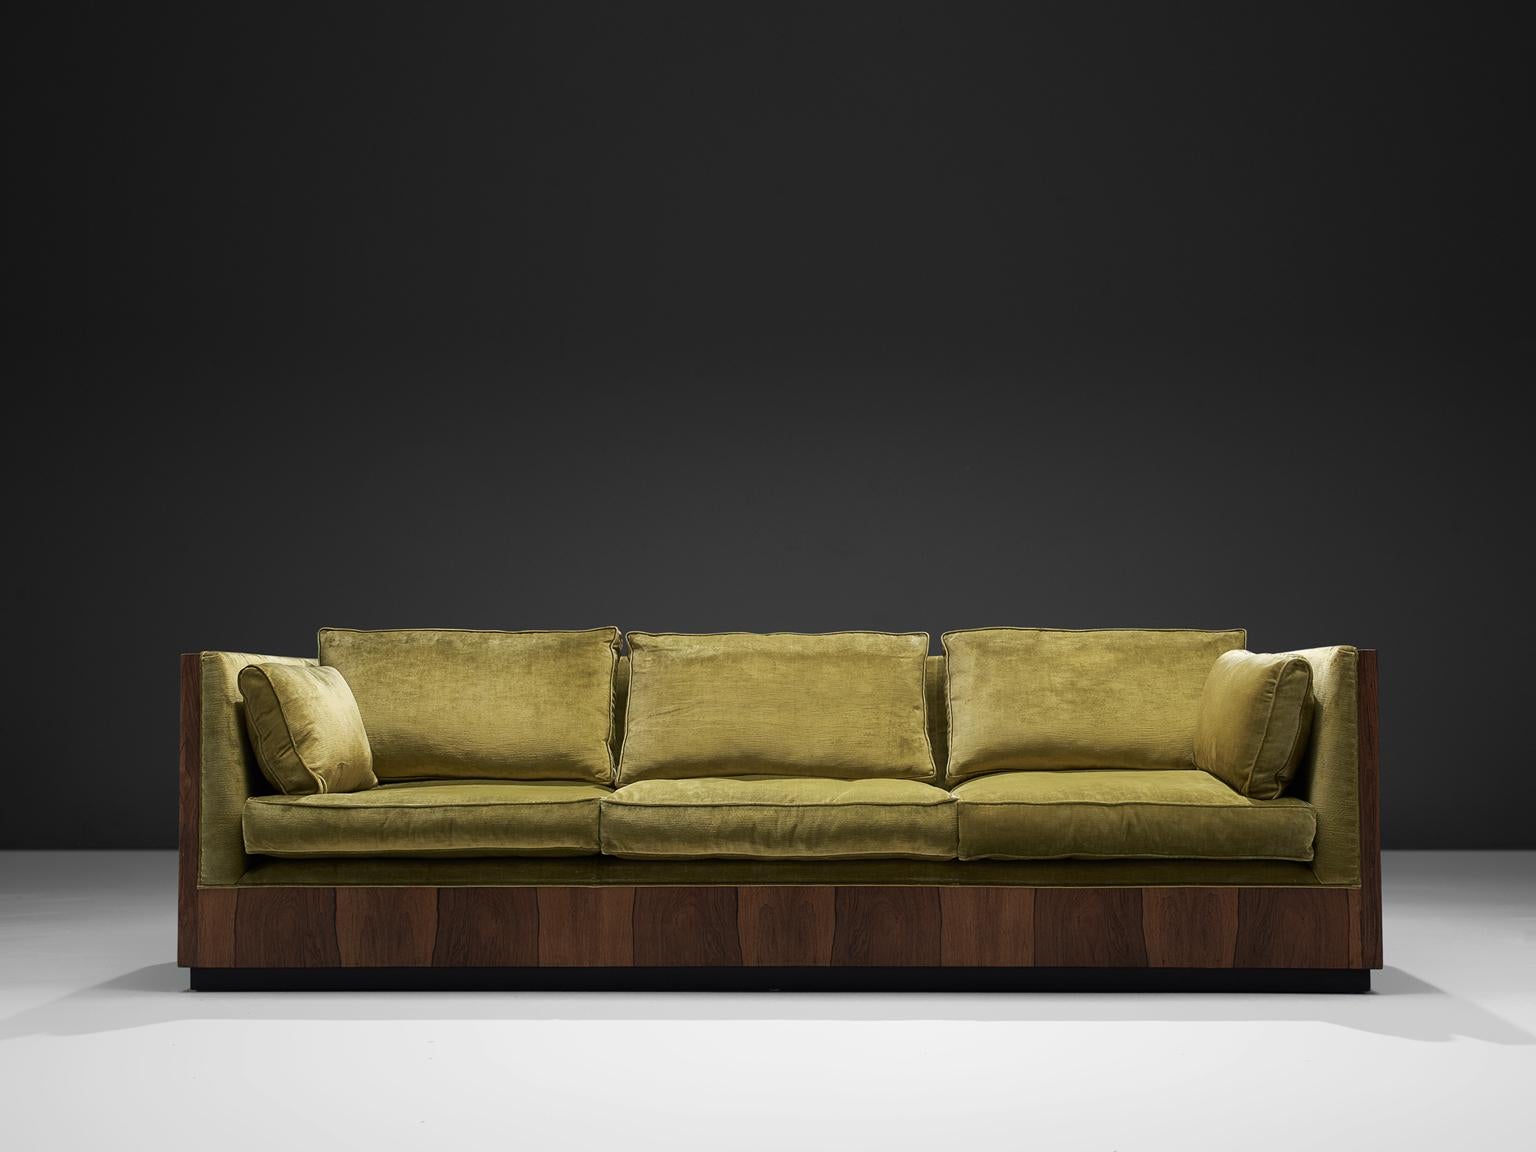 Sofa, green velvet, rosewood, Scandinavia, circa 1965

This three-seat 'basket' sofas is designed, circa 1965. The soft colored cushions fall perfectly in the rosewood frame of this settee. The design of this sofa is very geometric as the sides of